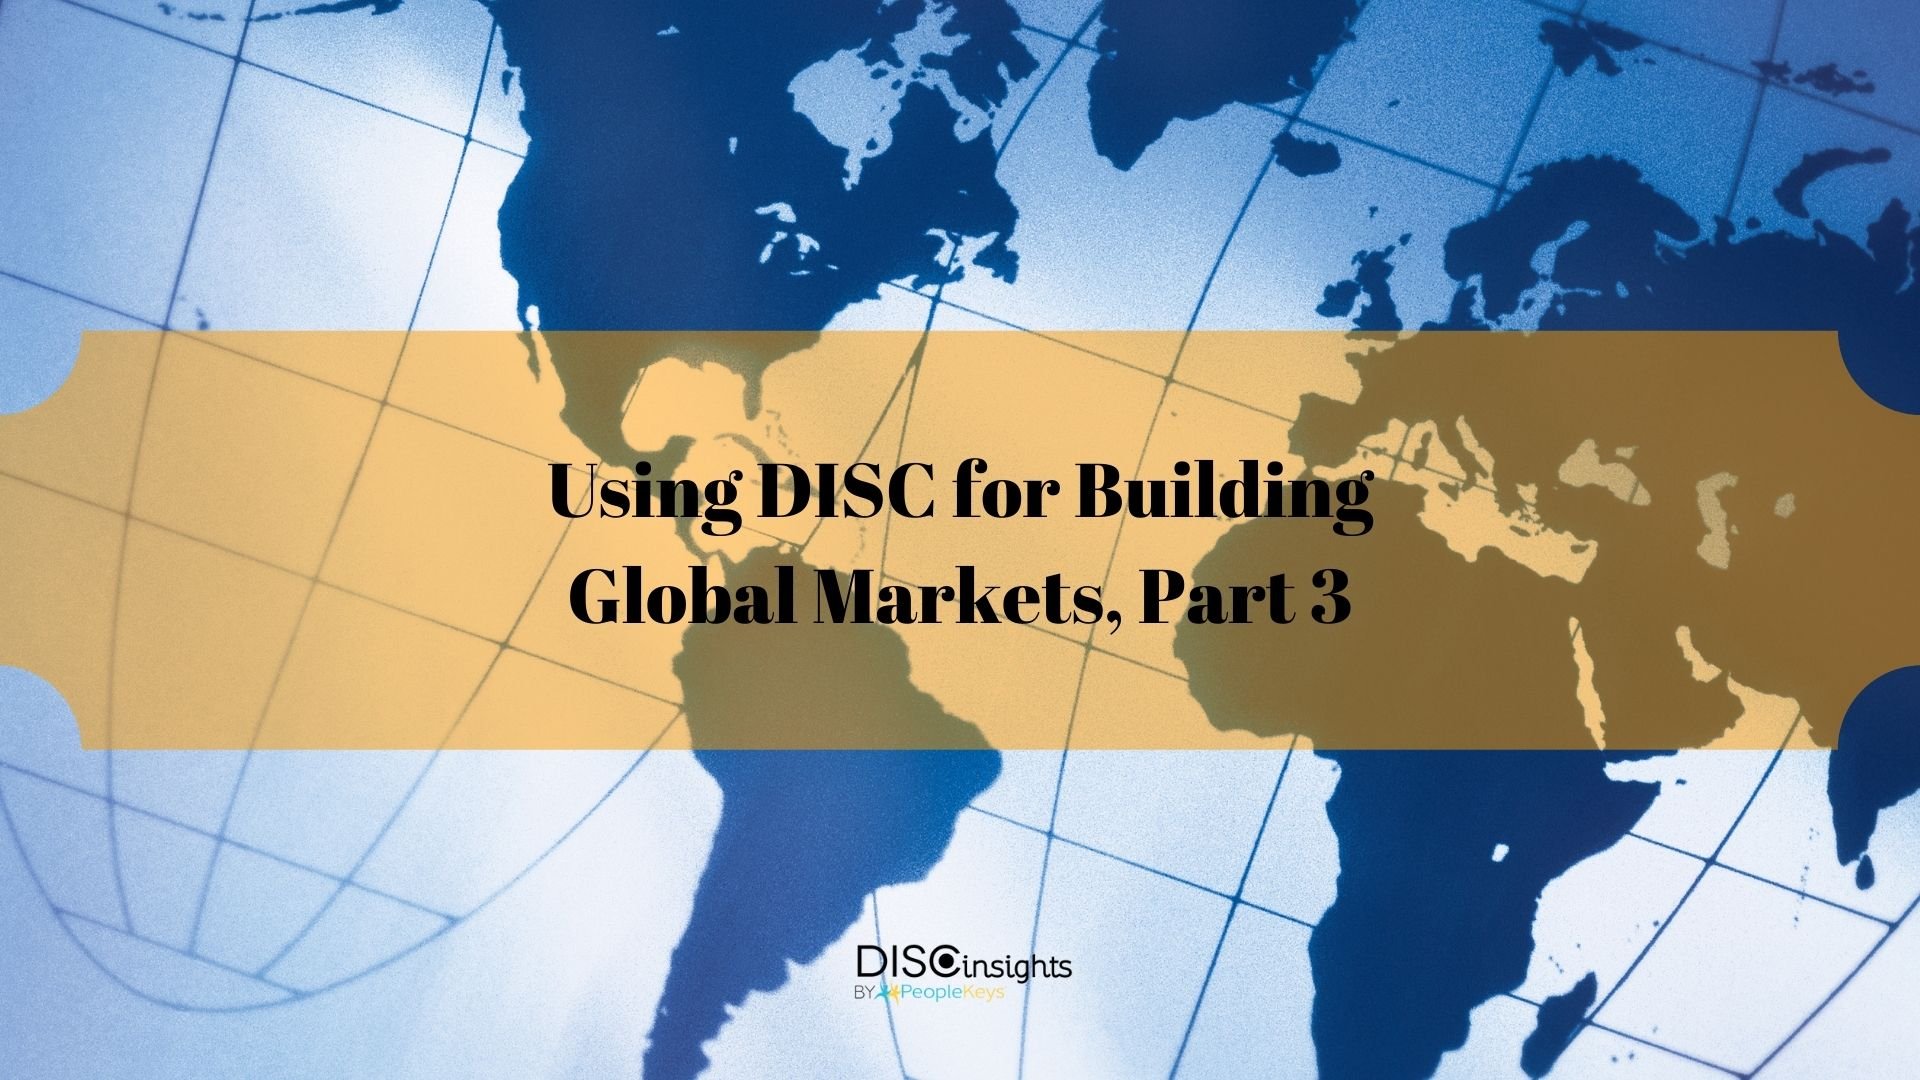 DI Blog Using DISC for building global markets, part 3